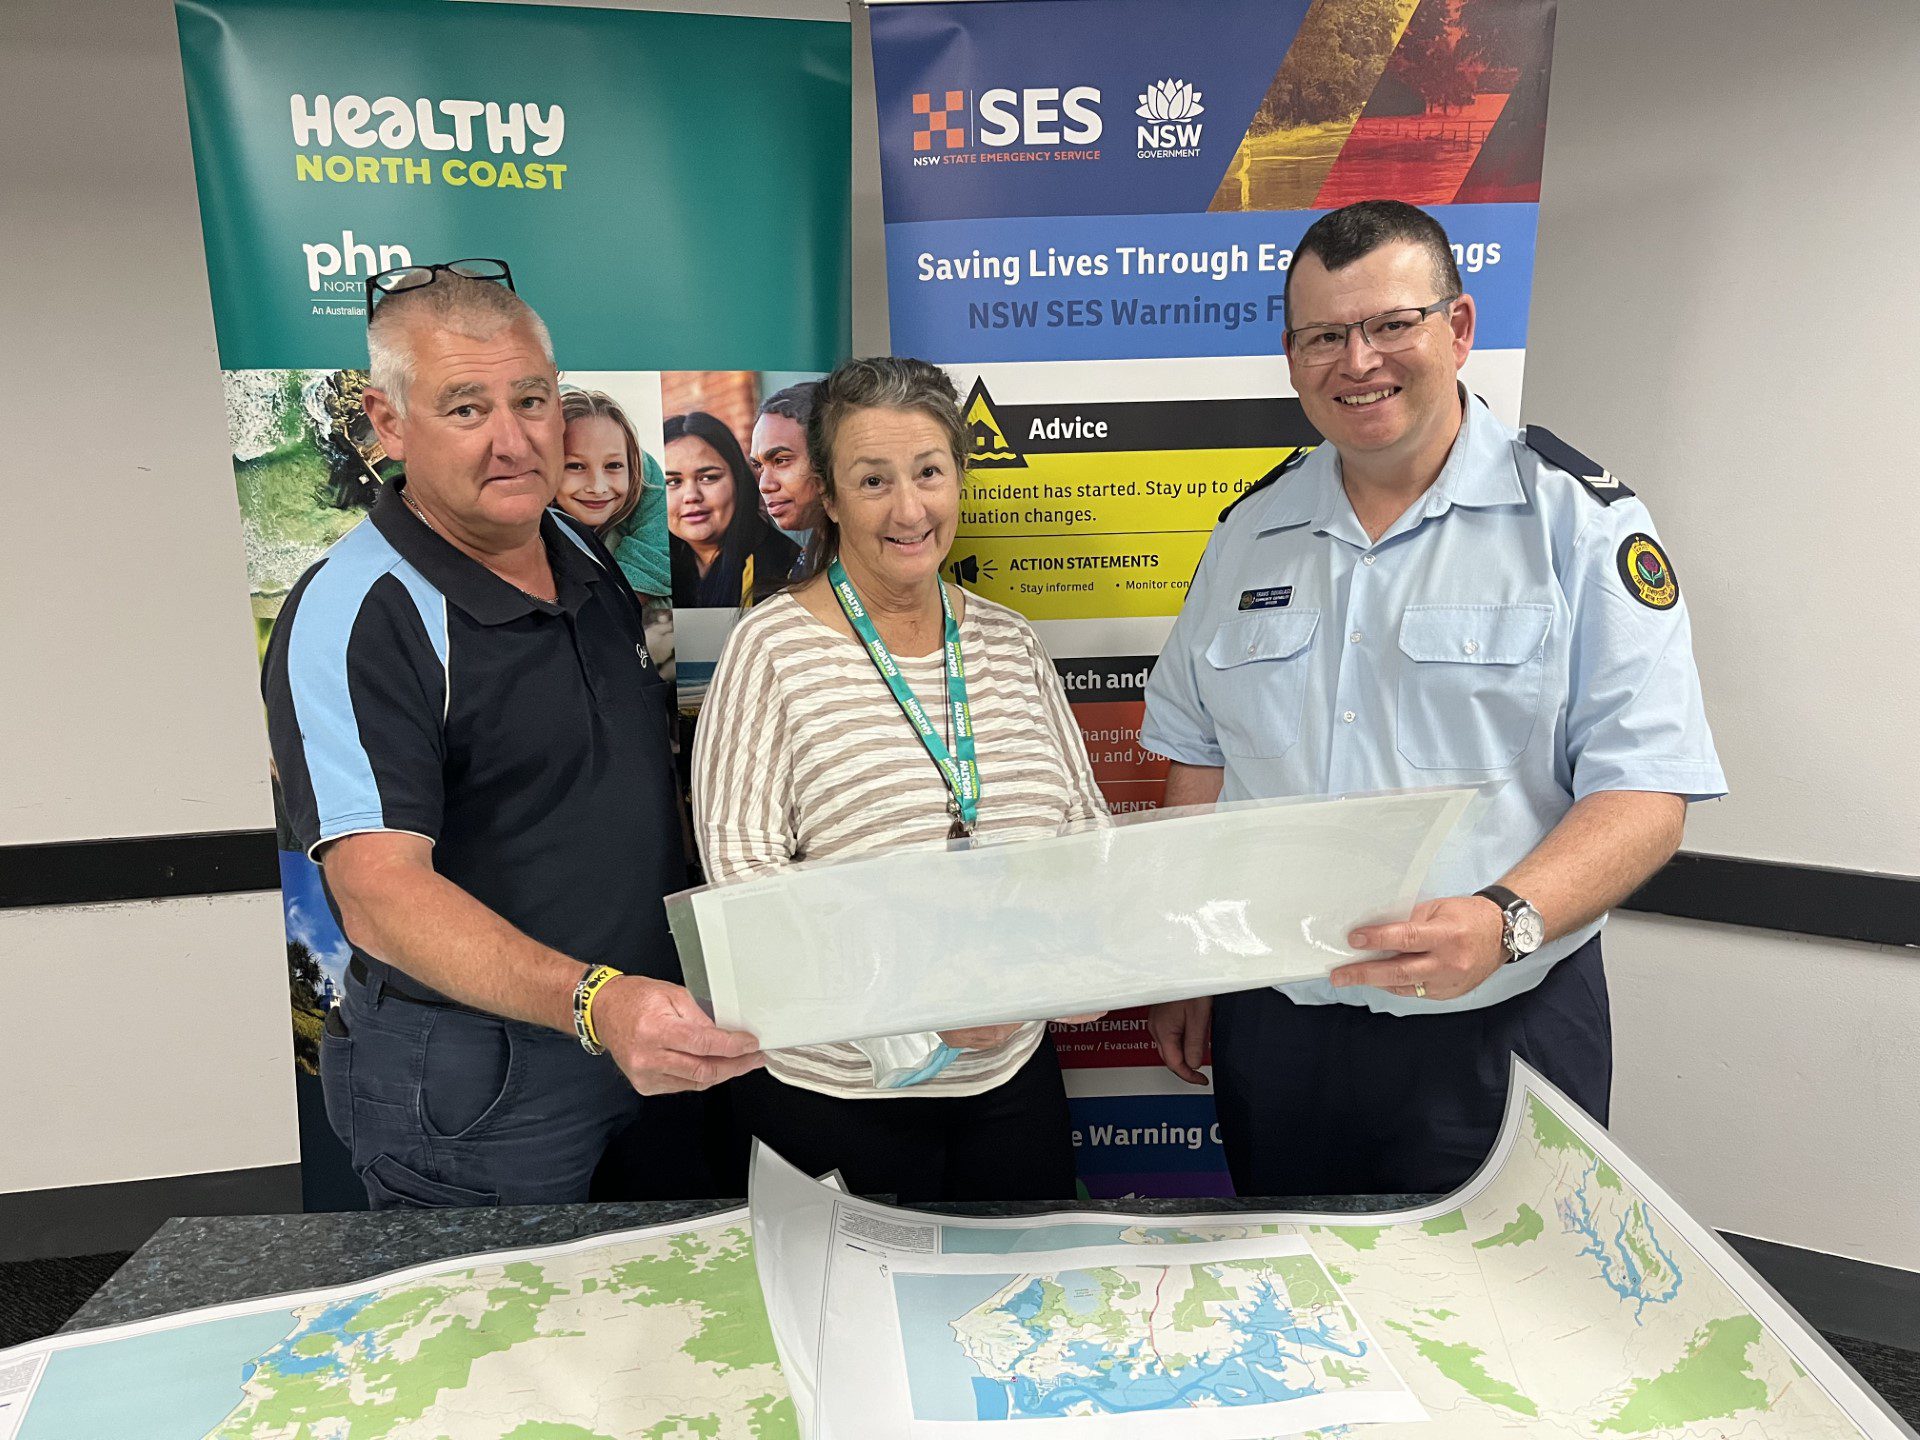 An image of Special Emergency Services (SES) officers with a member of Healthy North Coast meeting about how to prepare aged care homes for disasters